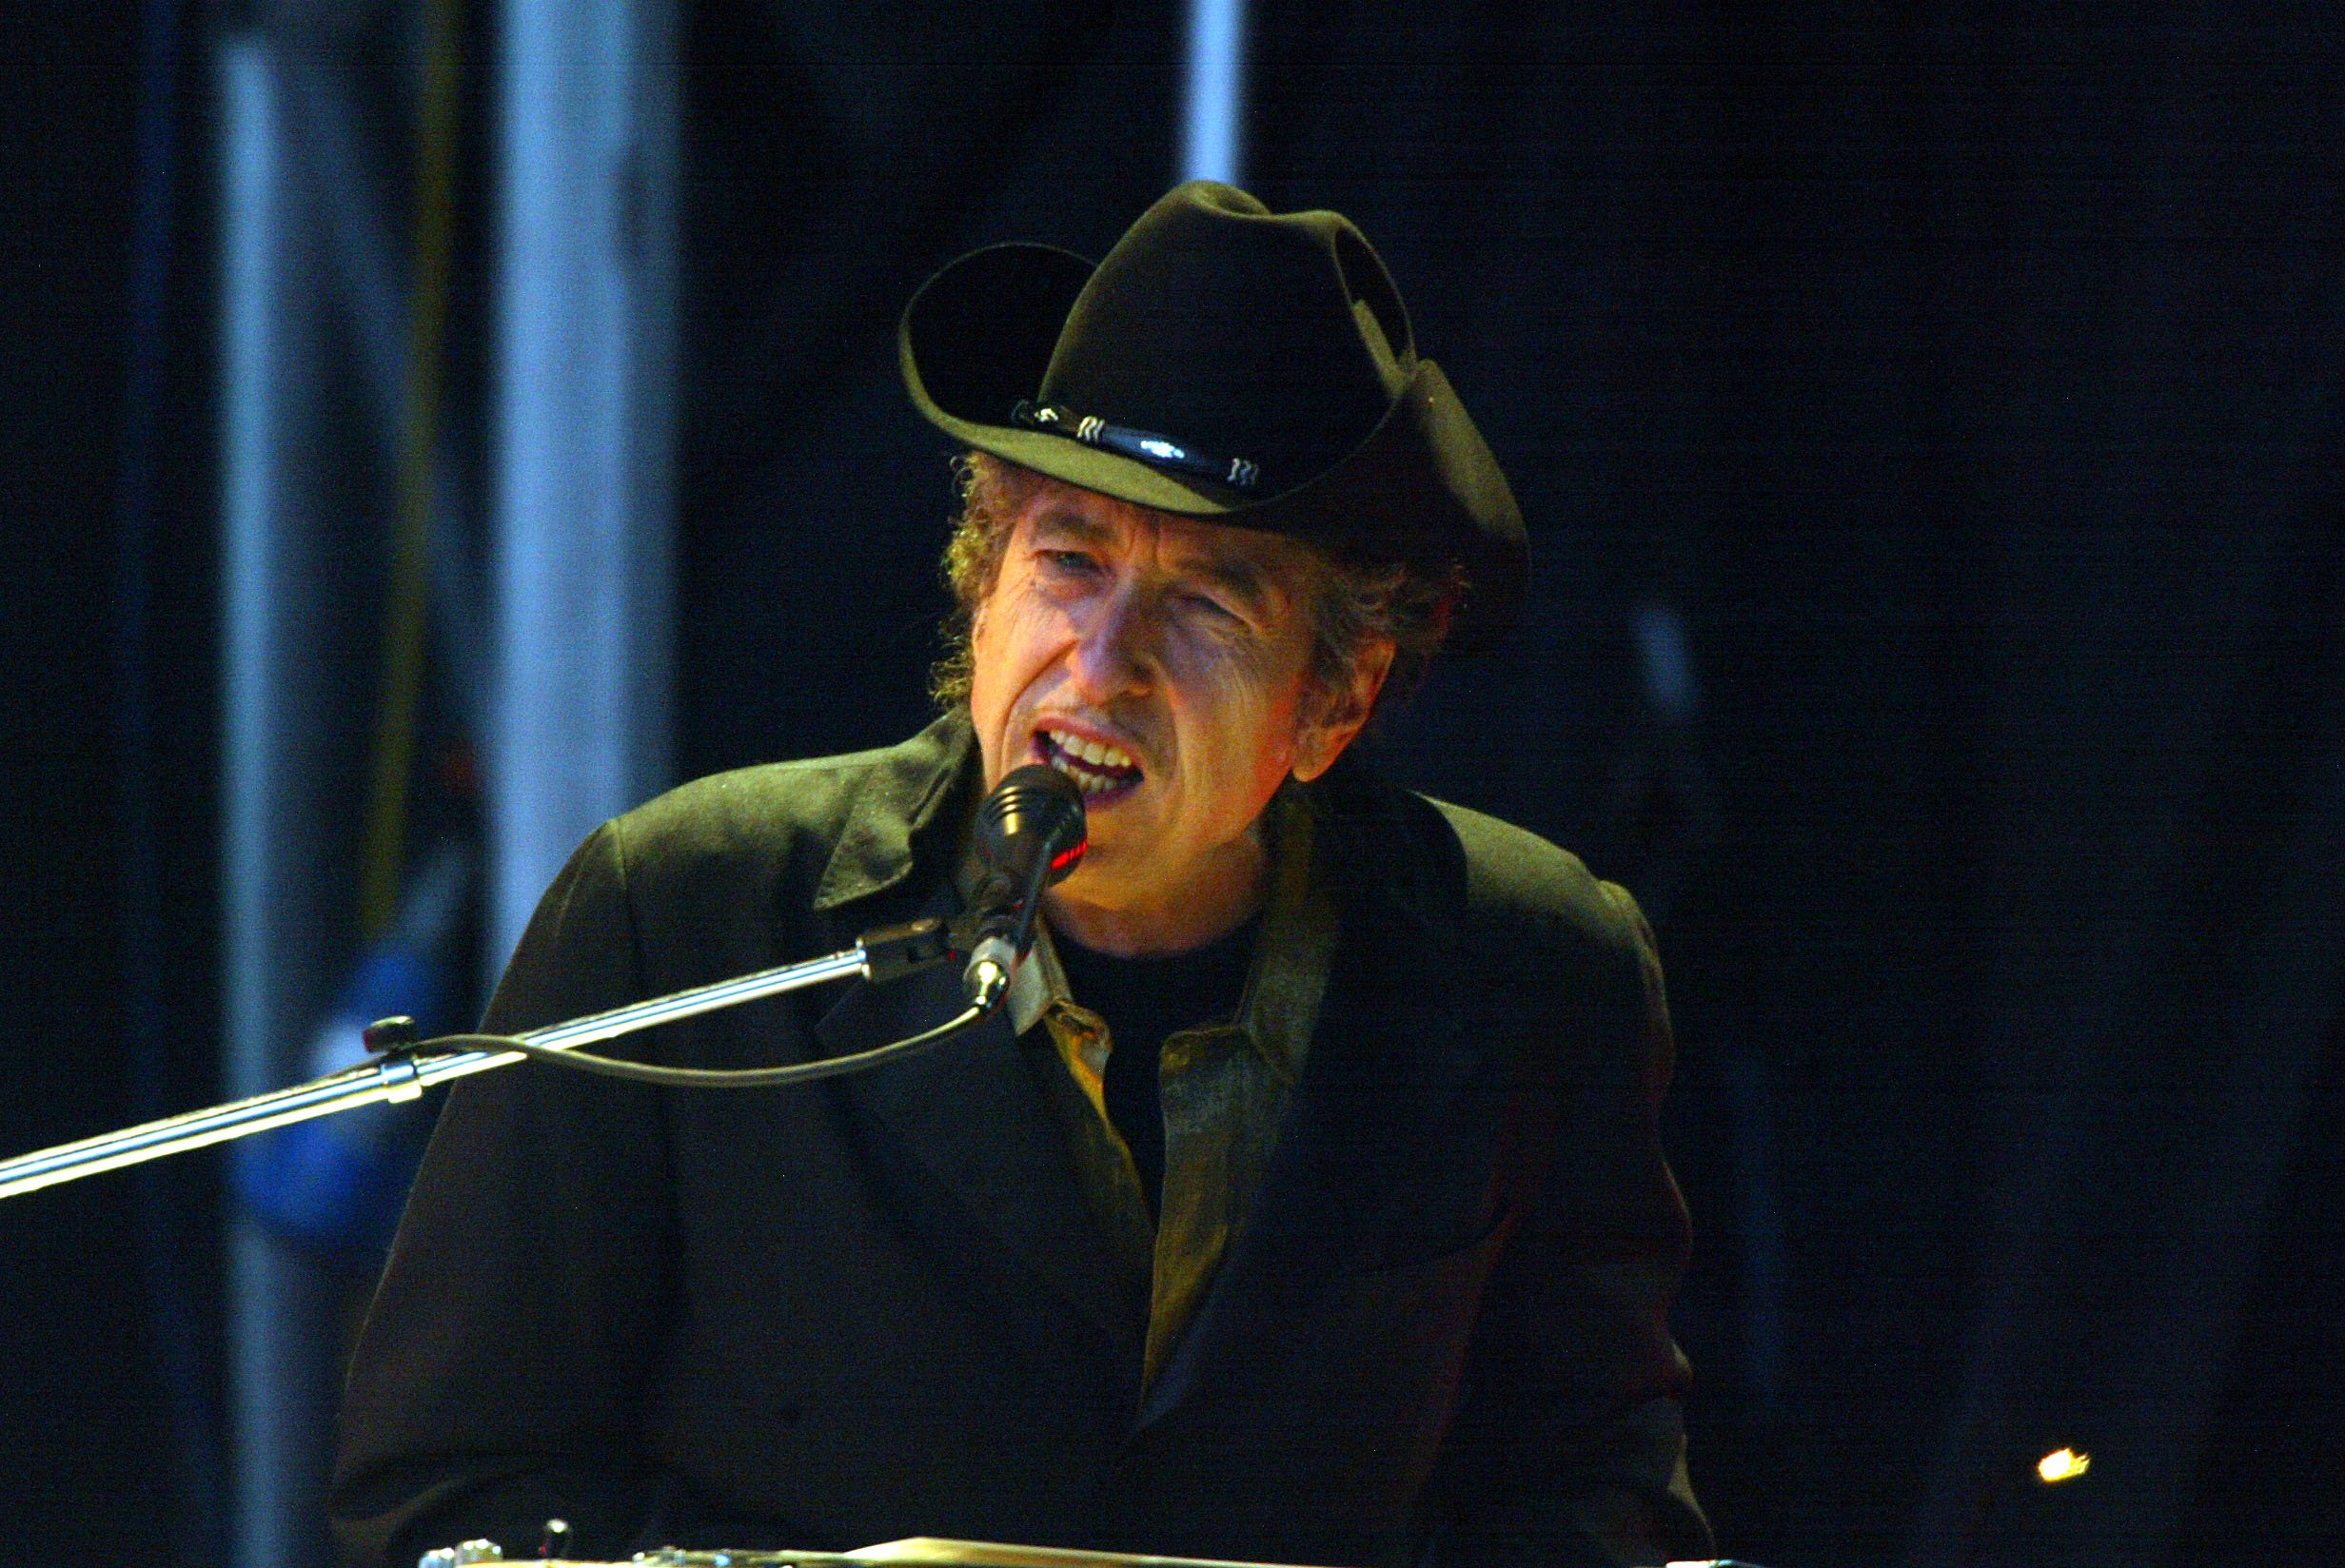 Bob Dylan wears a cowboy hat and sings into a microphone.